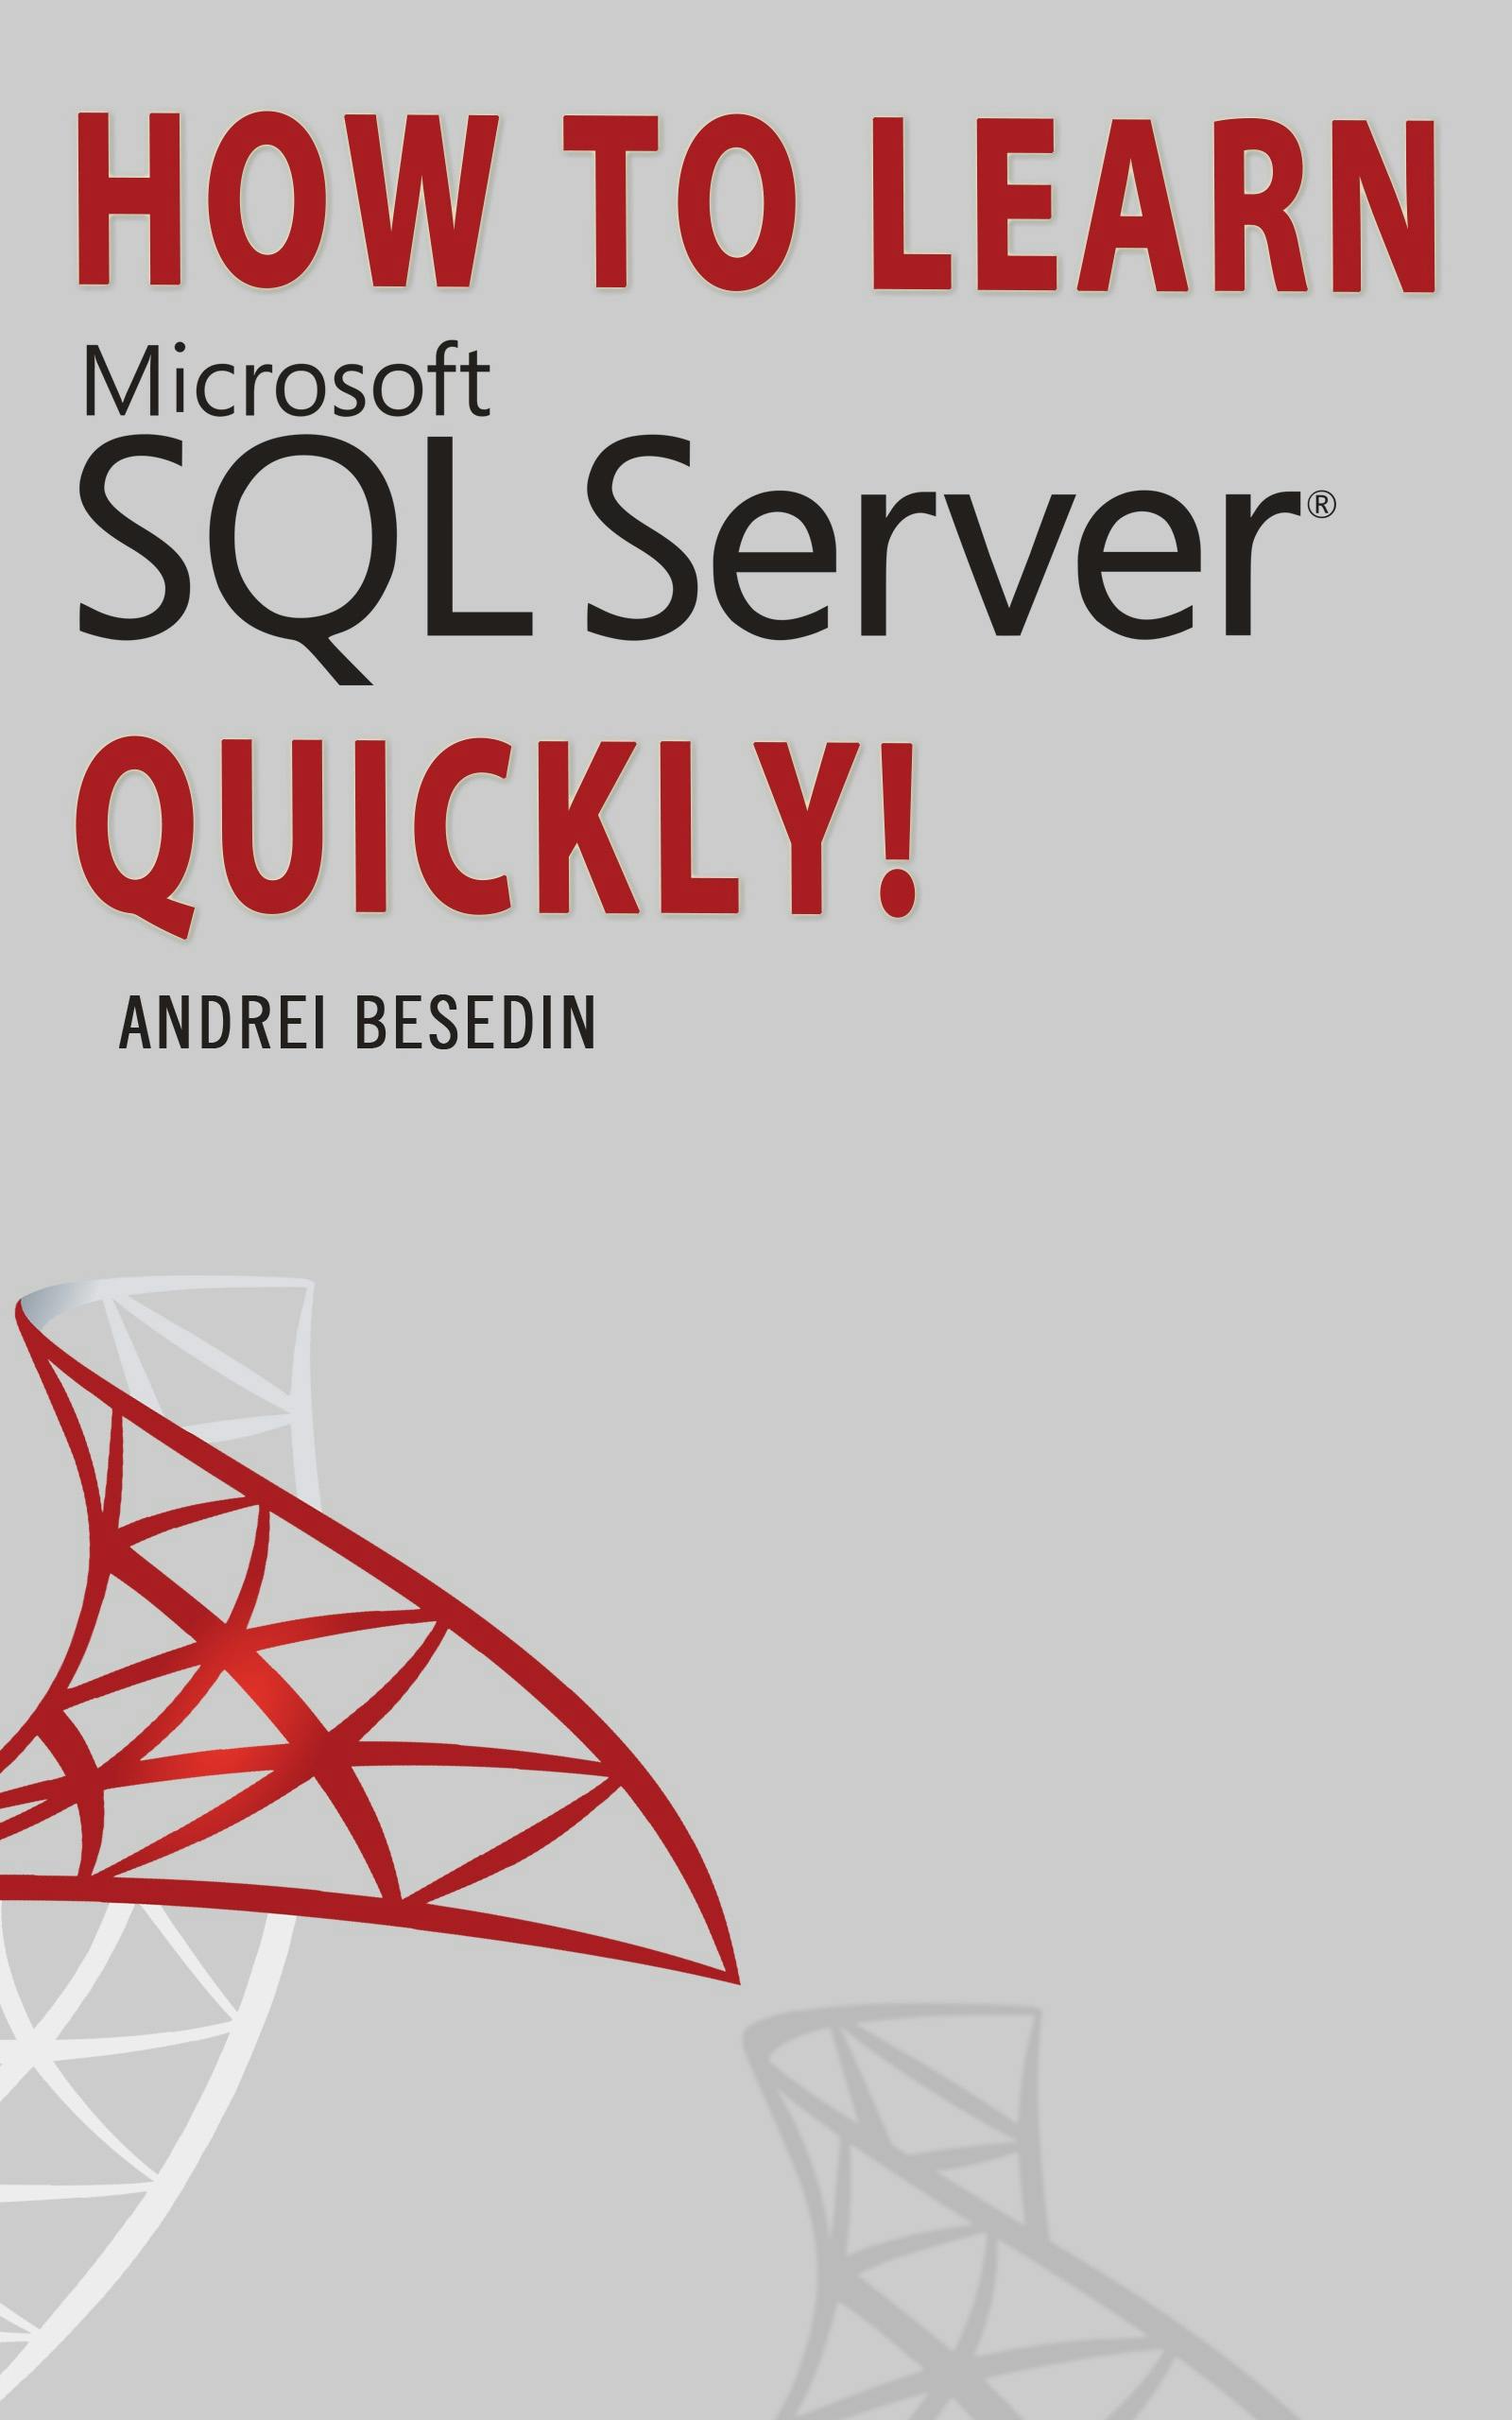 How To Learn Microsoft SQL Server Quickly! - Andrei Besedin